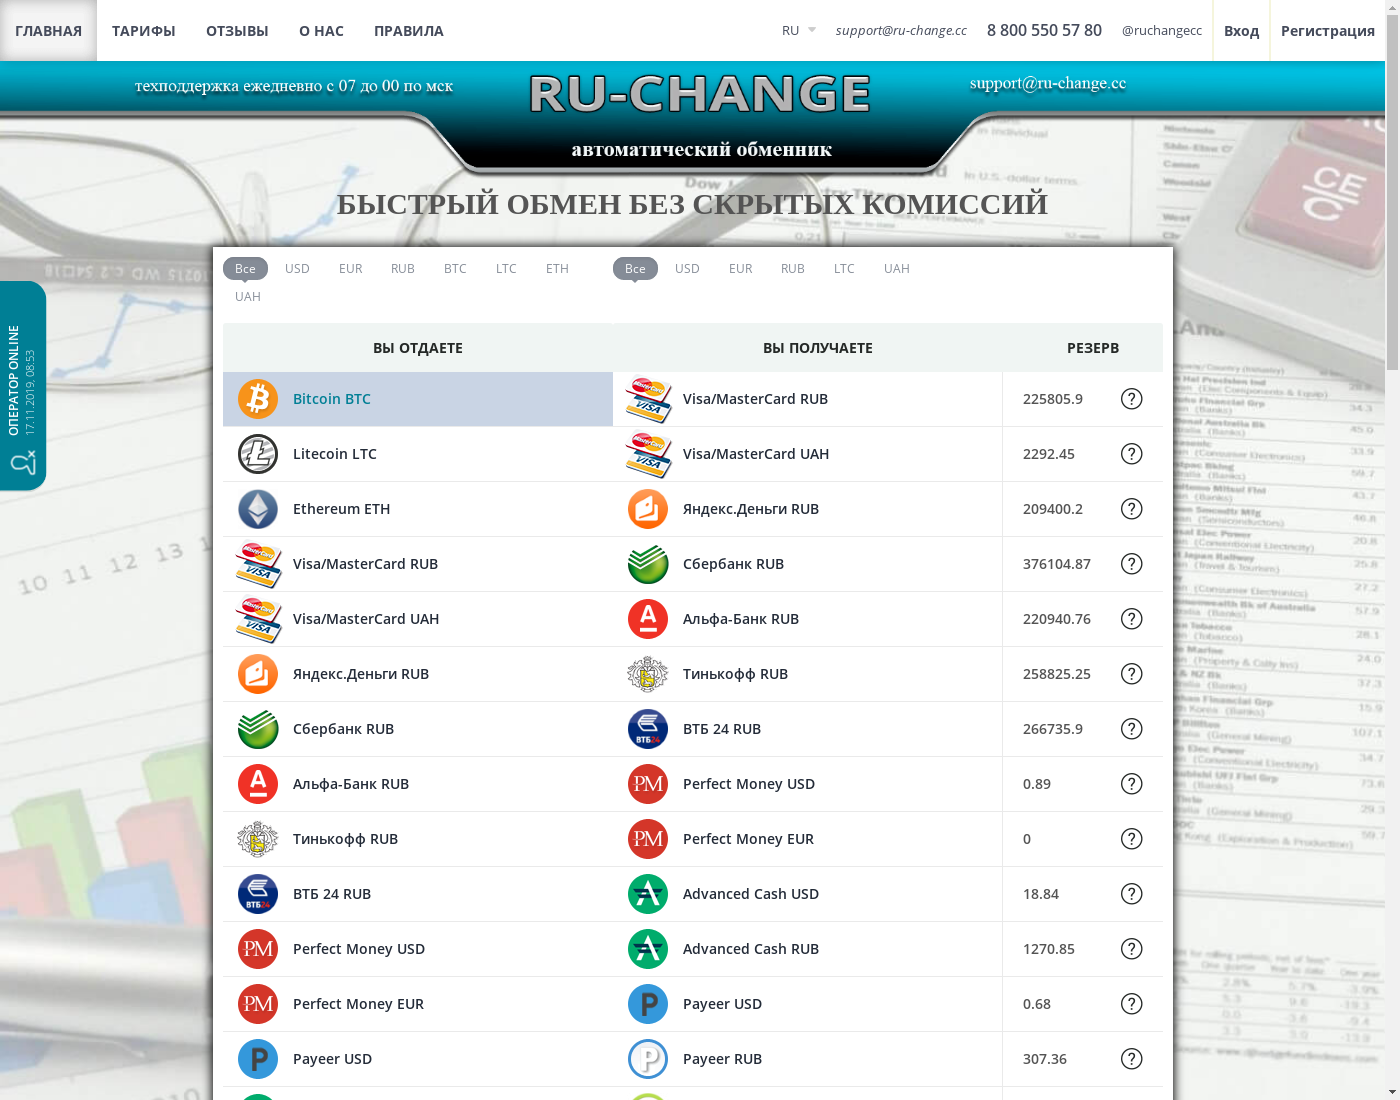 RUchange user interface: the home page in English